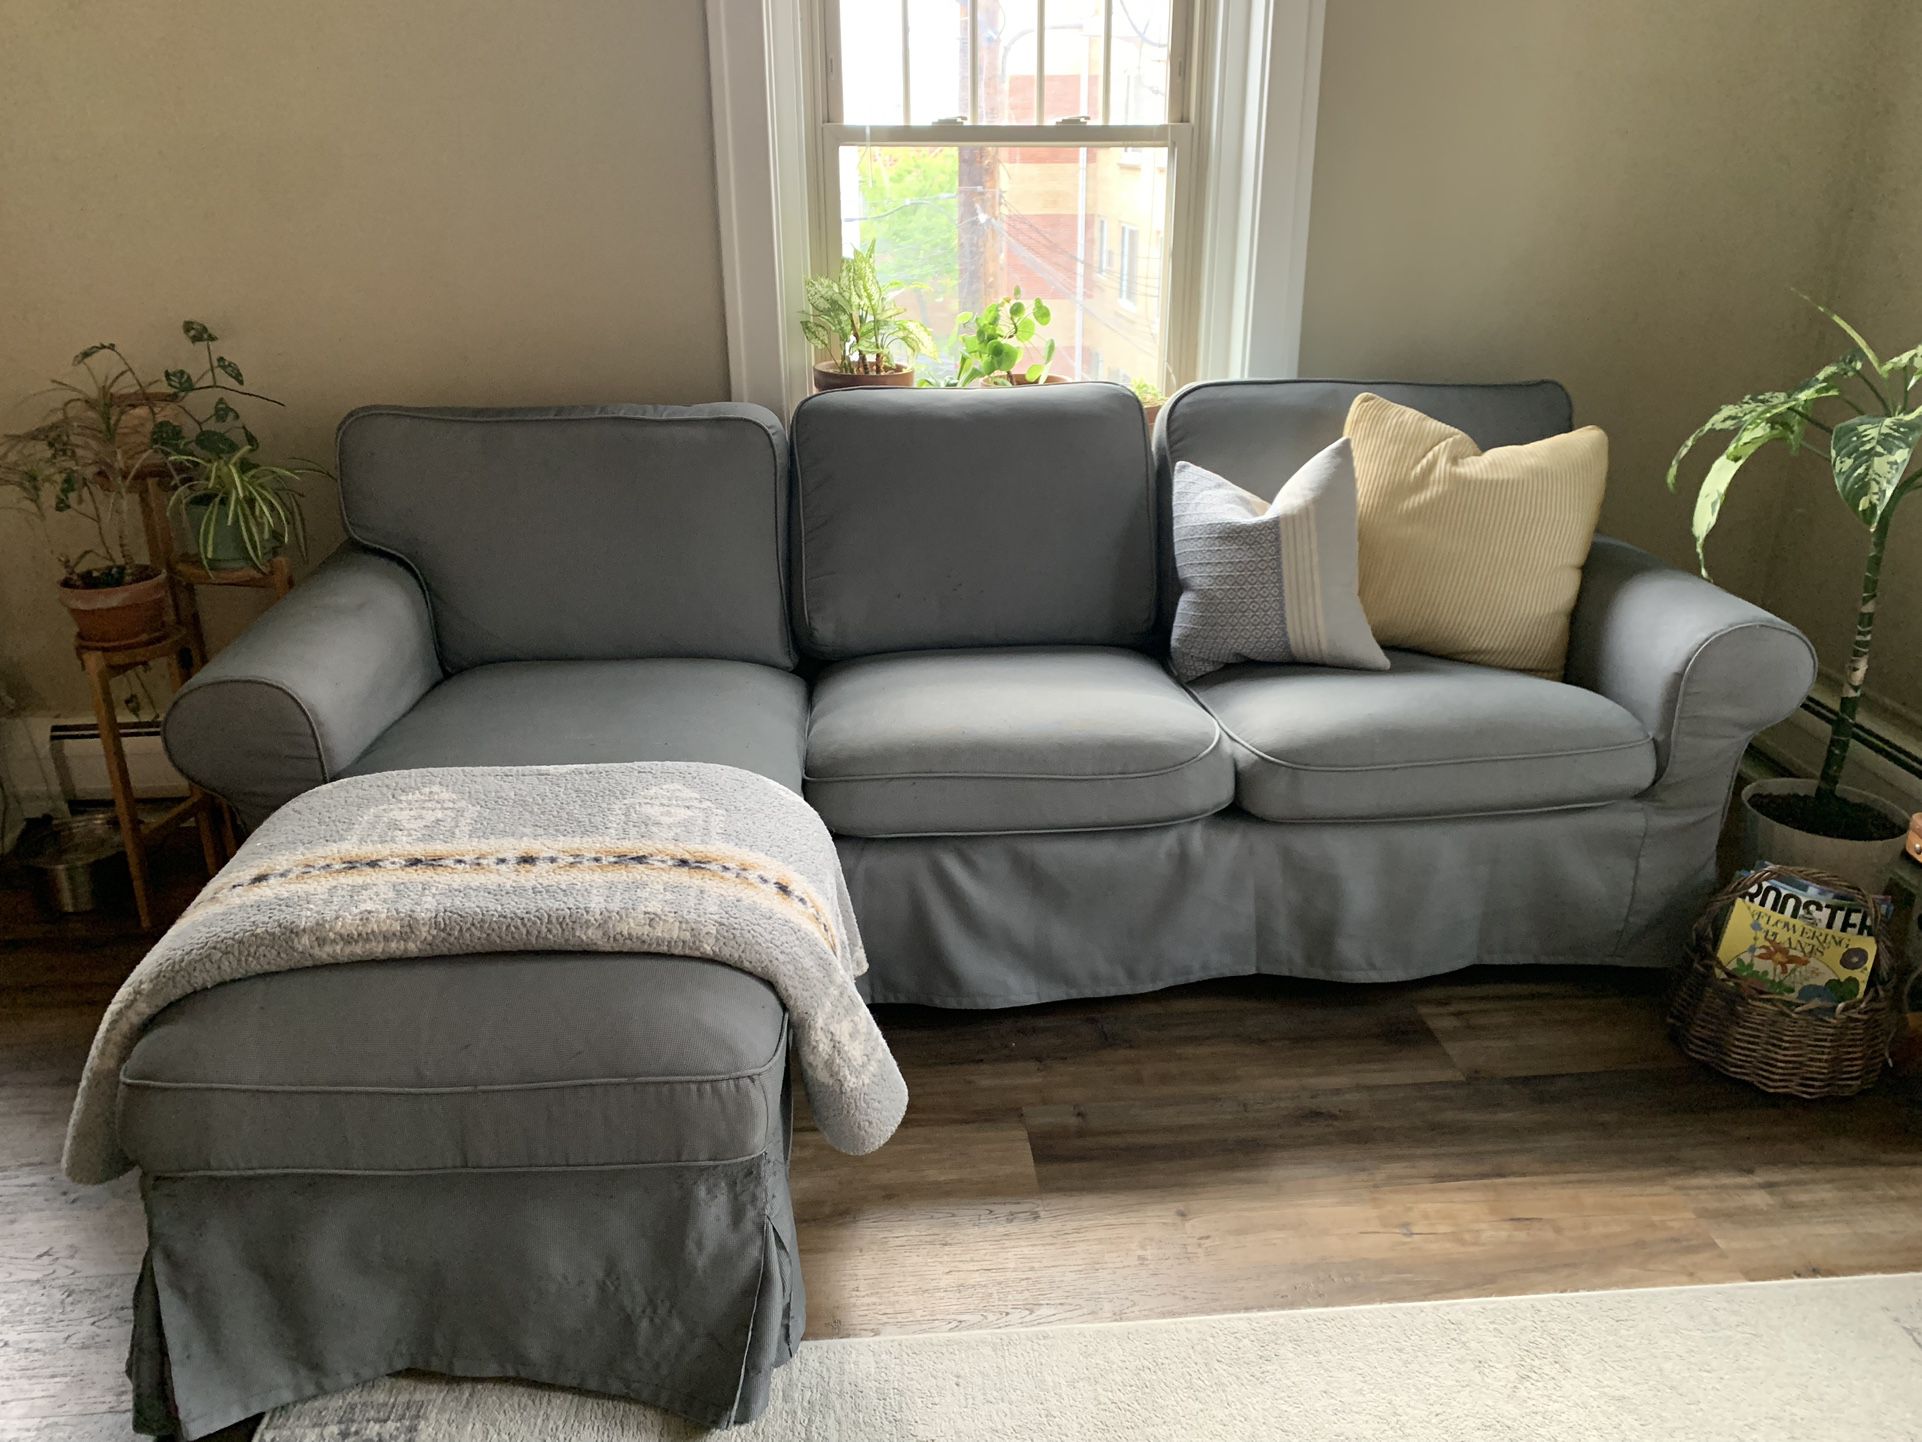 Couch : Ikea Uppland Changeable Chaise Removable Cover